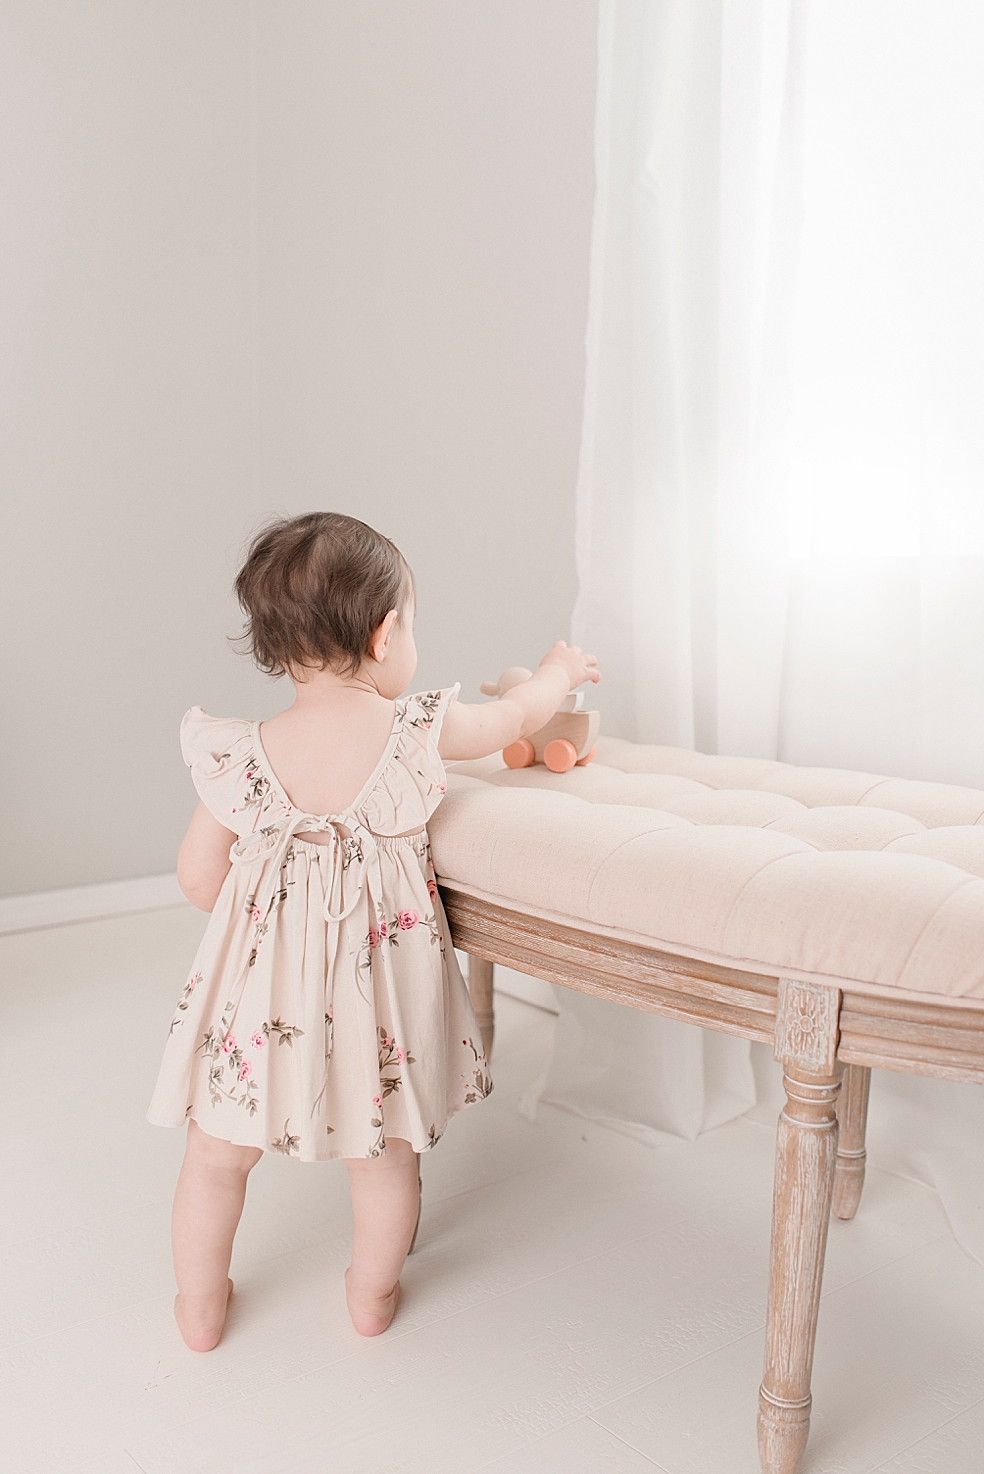 Baby girl in a floral print dress playing with a wooden duck | Photo by Jessica Lee Photography